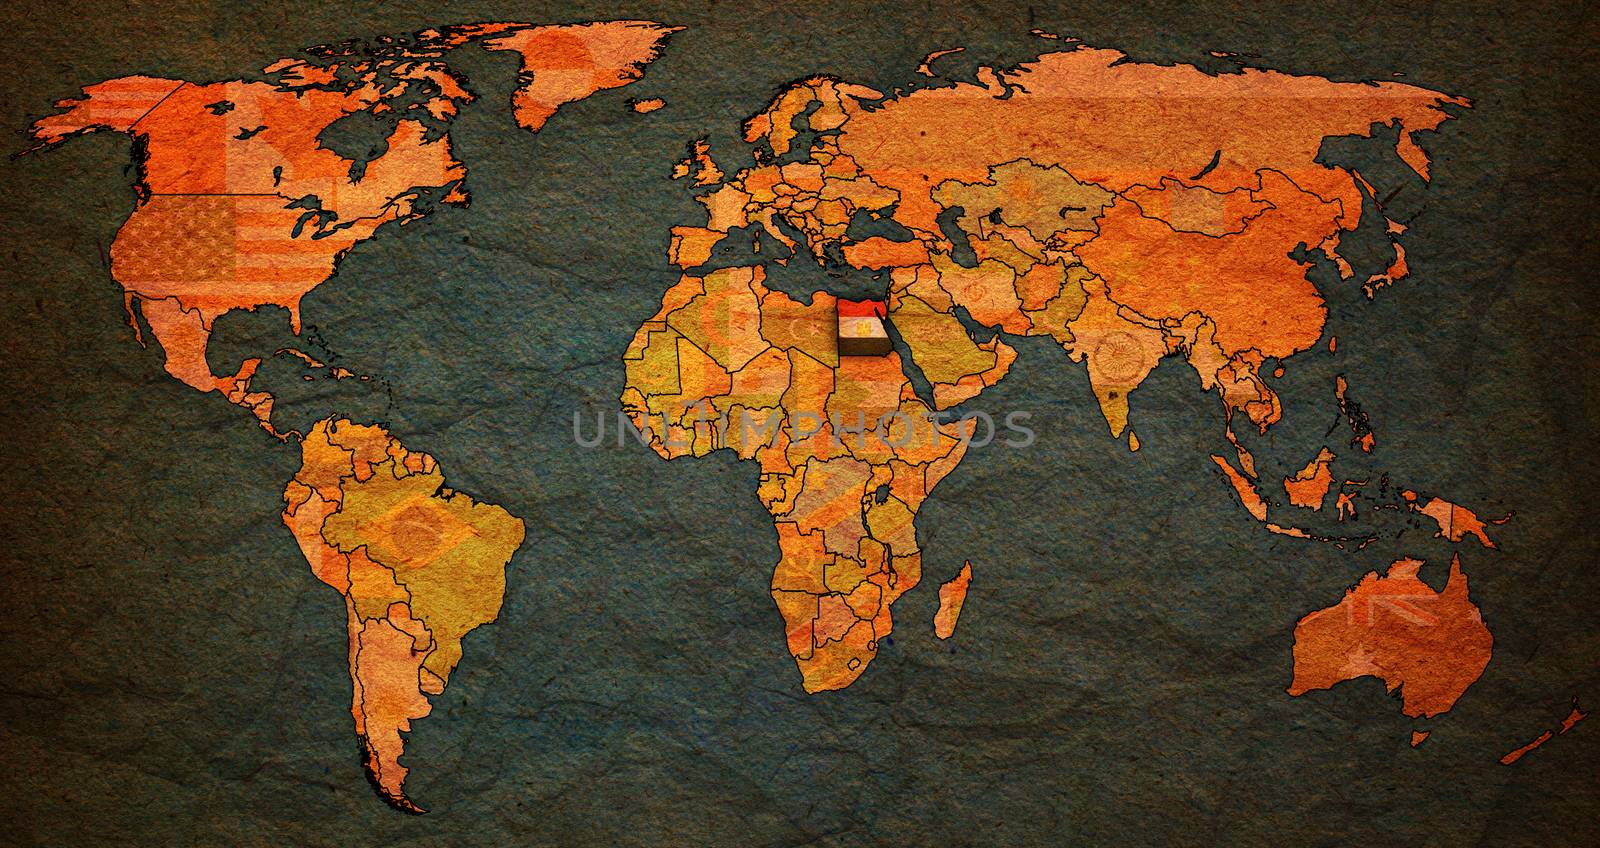 egypt territory on actual world map by michal812